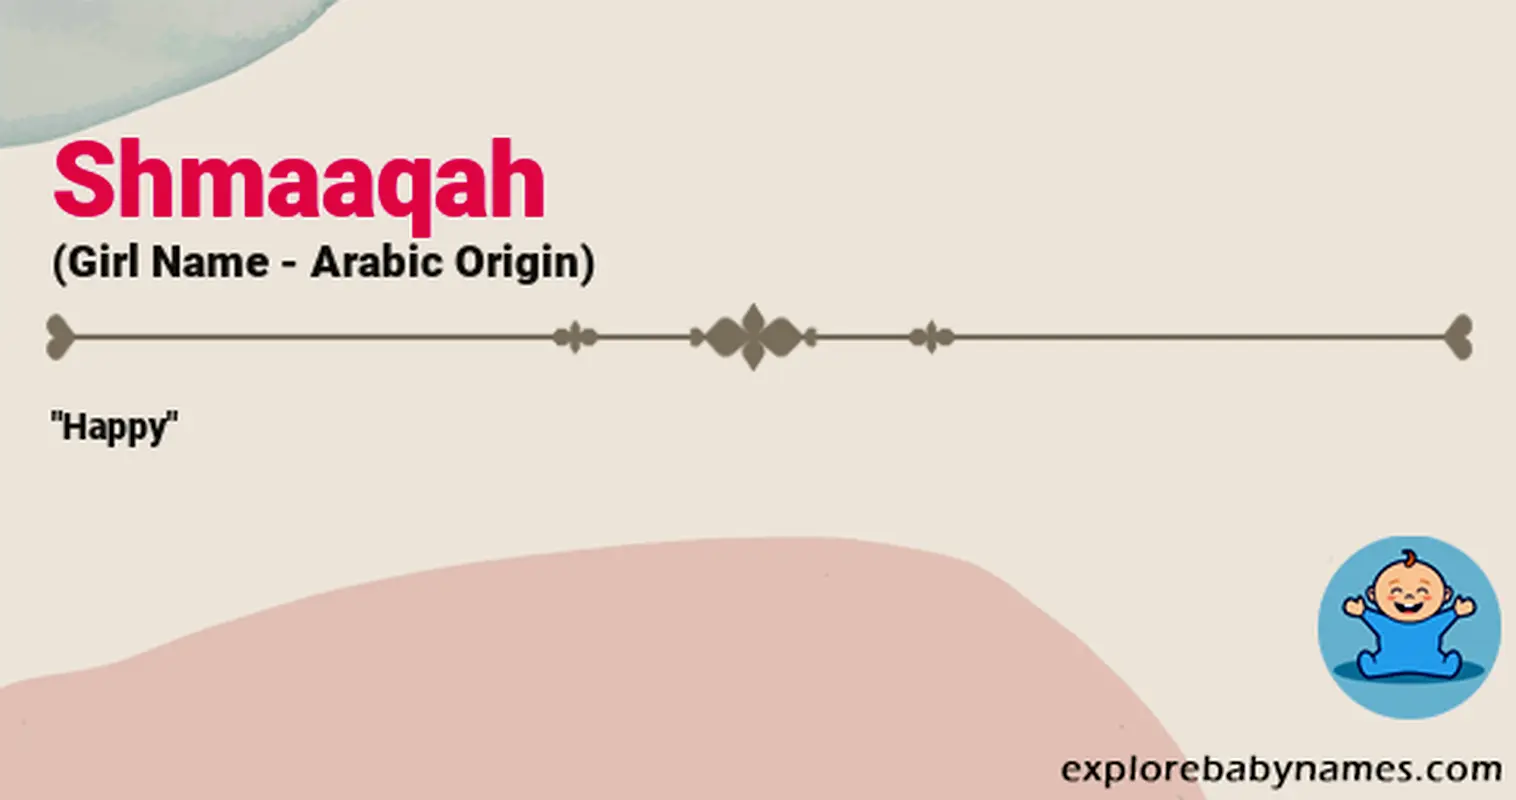 Meaning of Shmaaqah